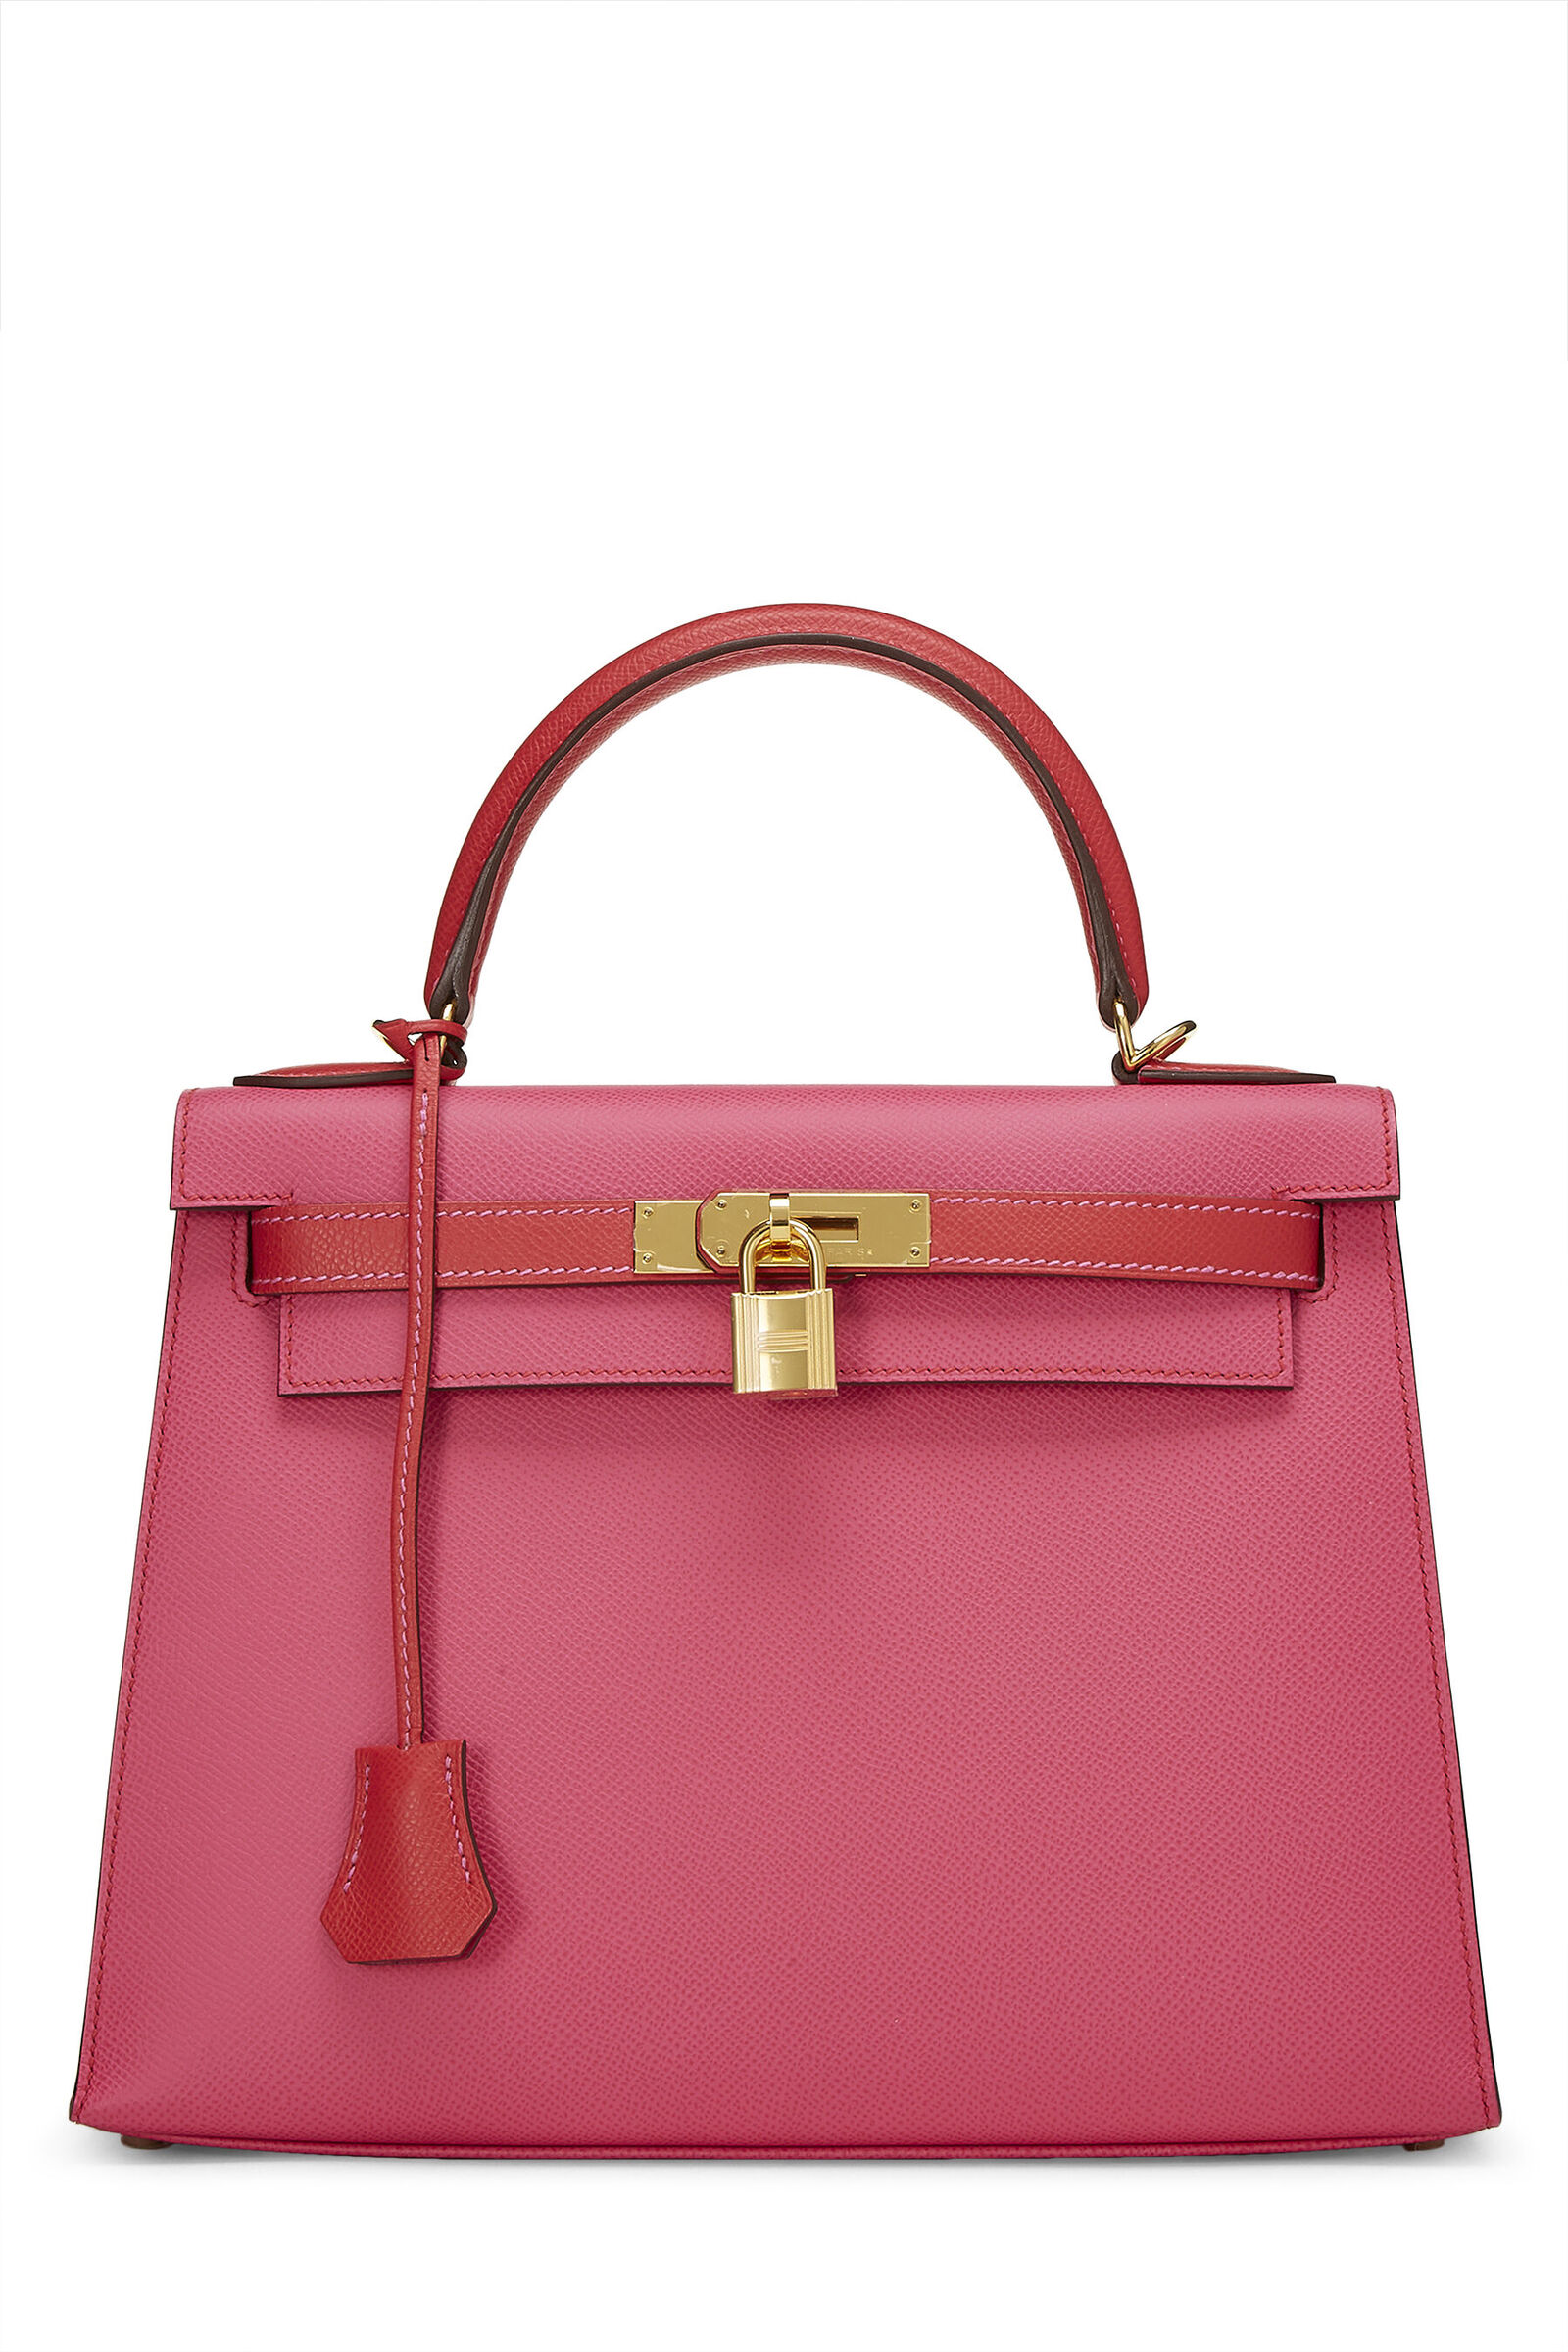 5 Birkin Bag Designs to Look For When You're Buying